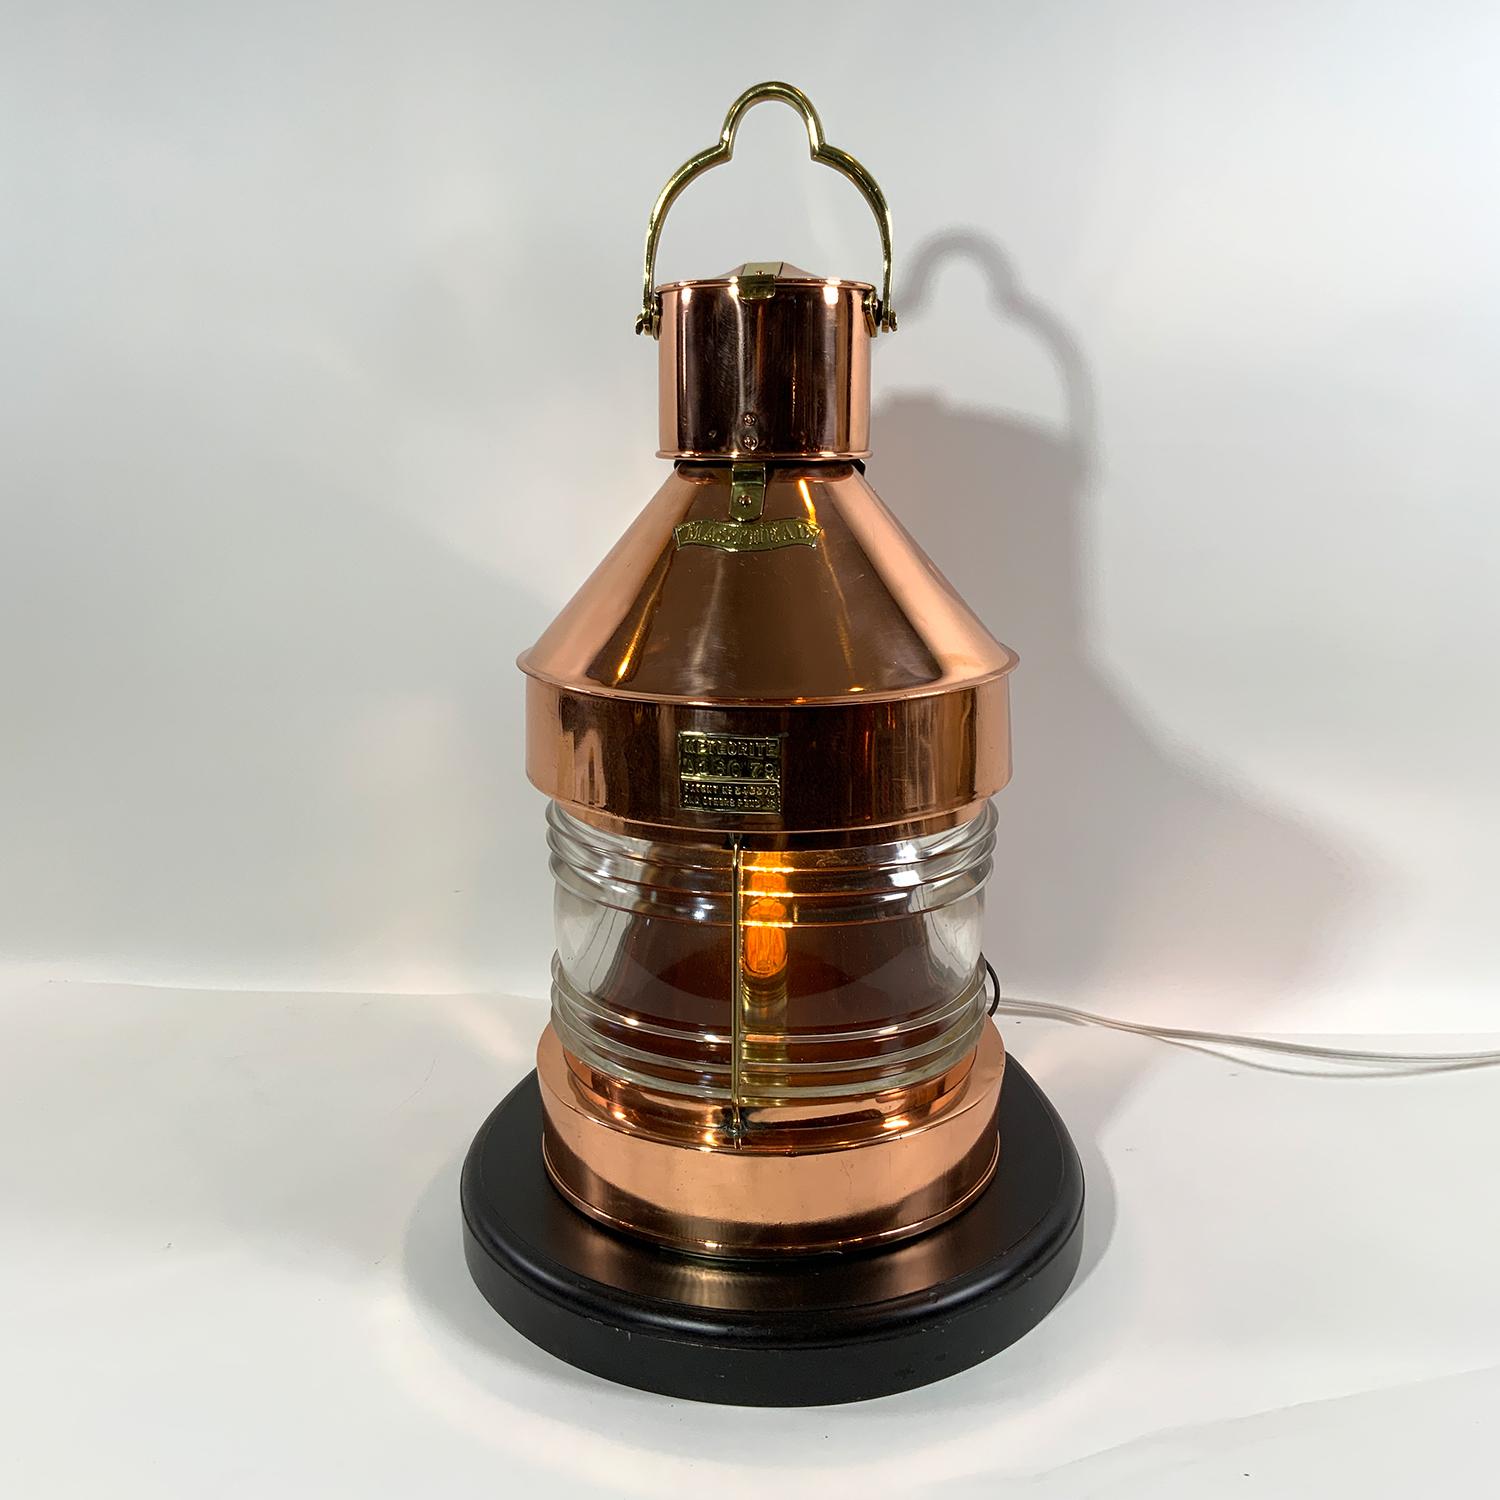 Solid copper and brass ships lantern with Fresnel glass lens. Meticulously polished and lacquered and mounted to a thick wood base. The lantern case is fitted with a makers plate from 